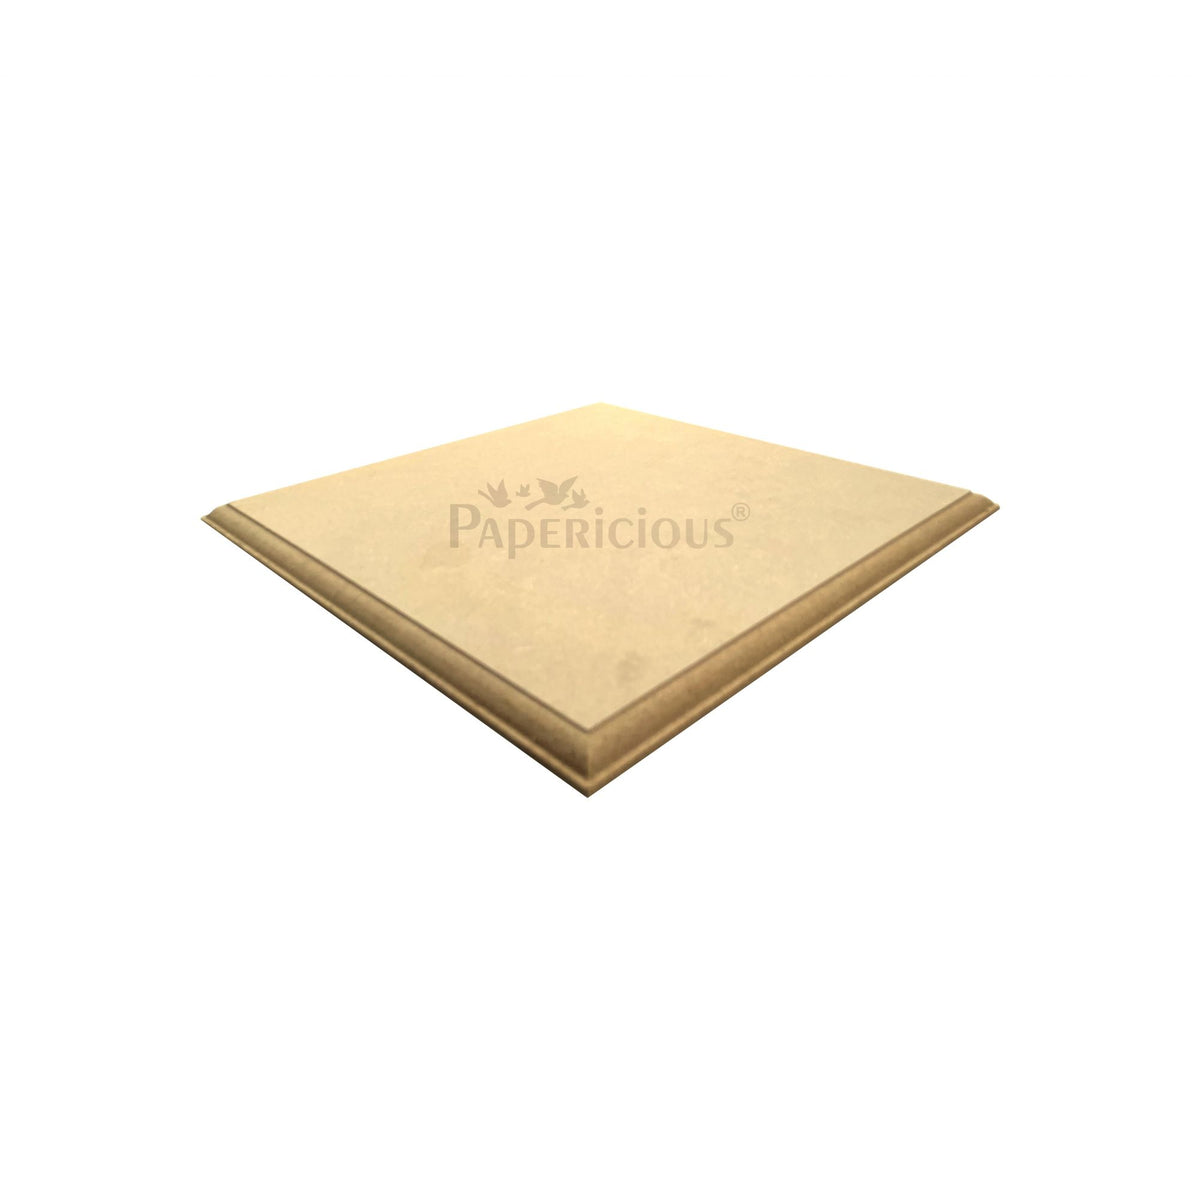 PAPERICIOUS MDF Square Base - 12 mm thick